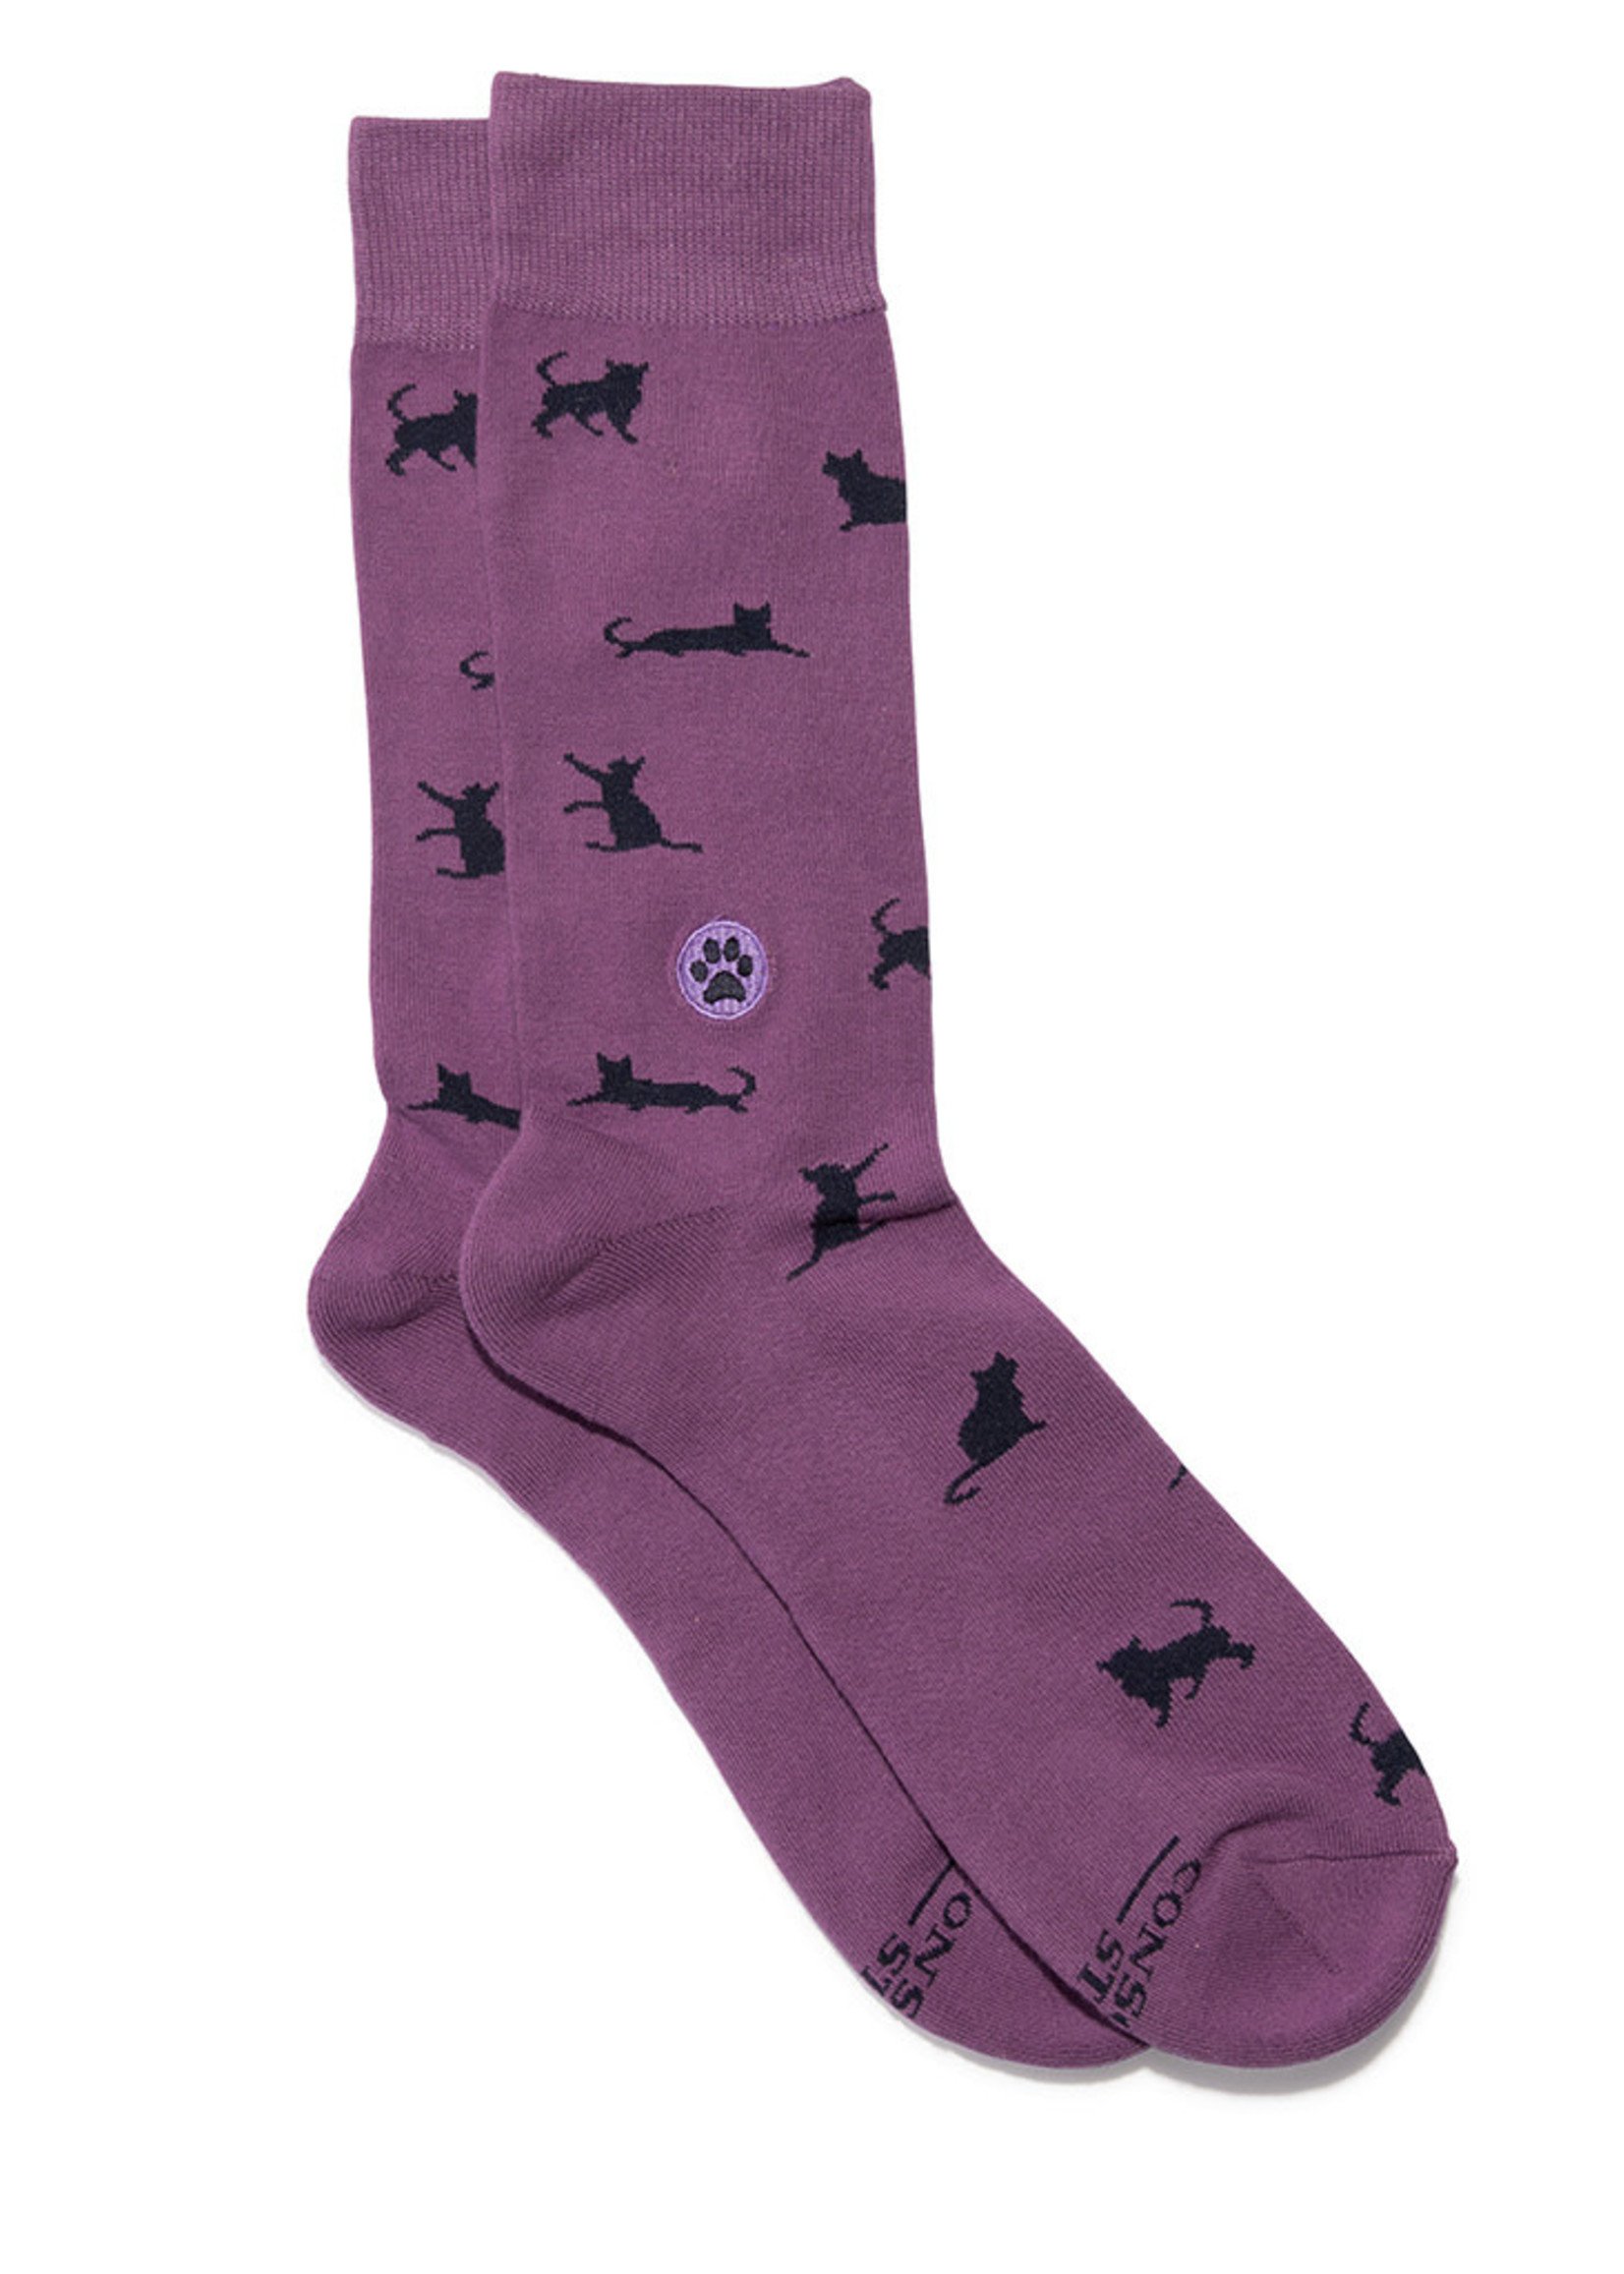 Conscious Step Women's Socks That Save Cats